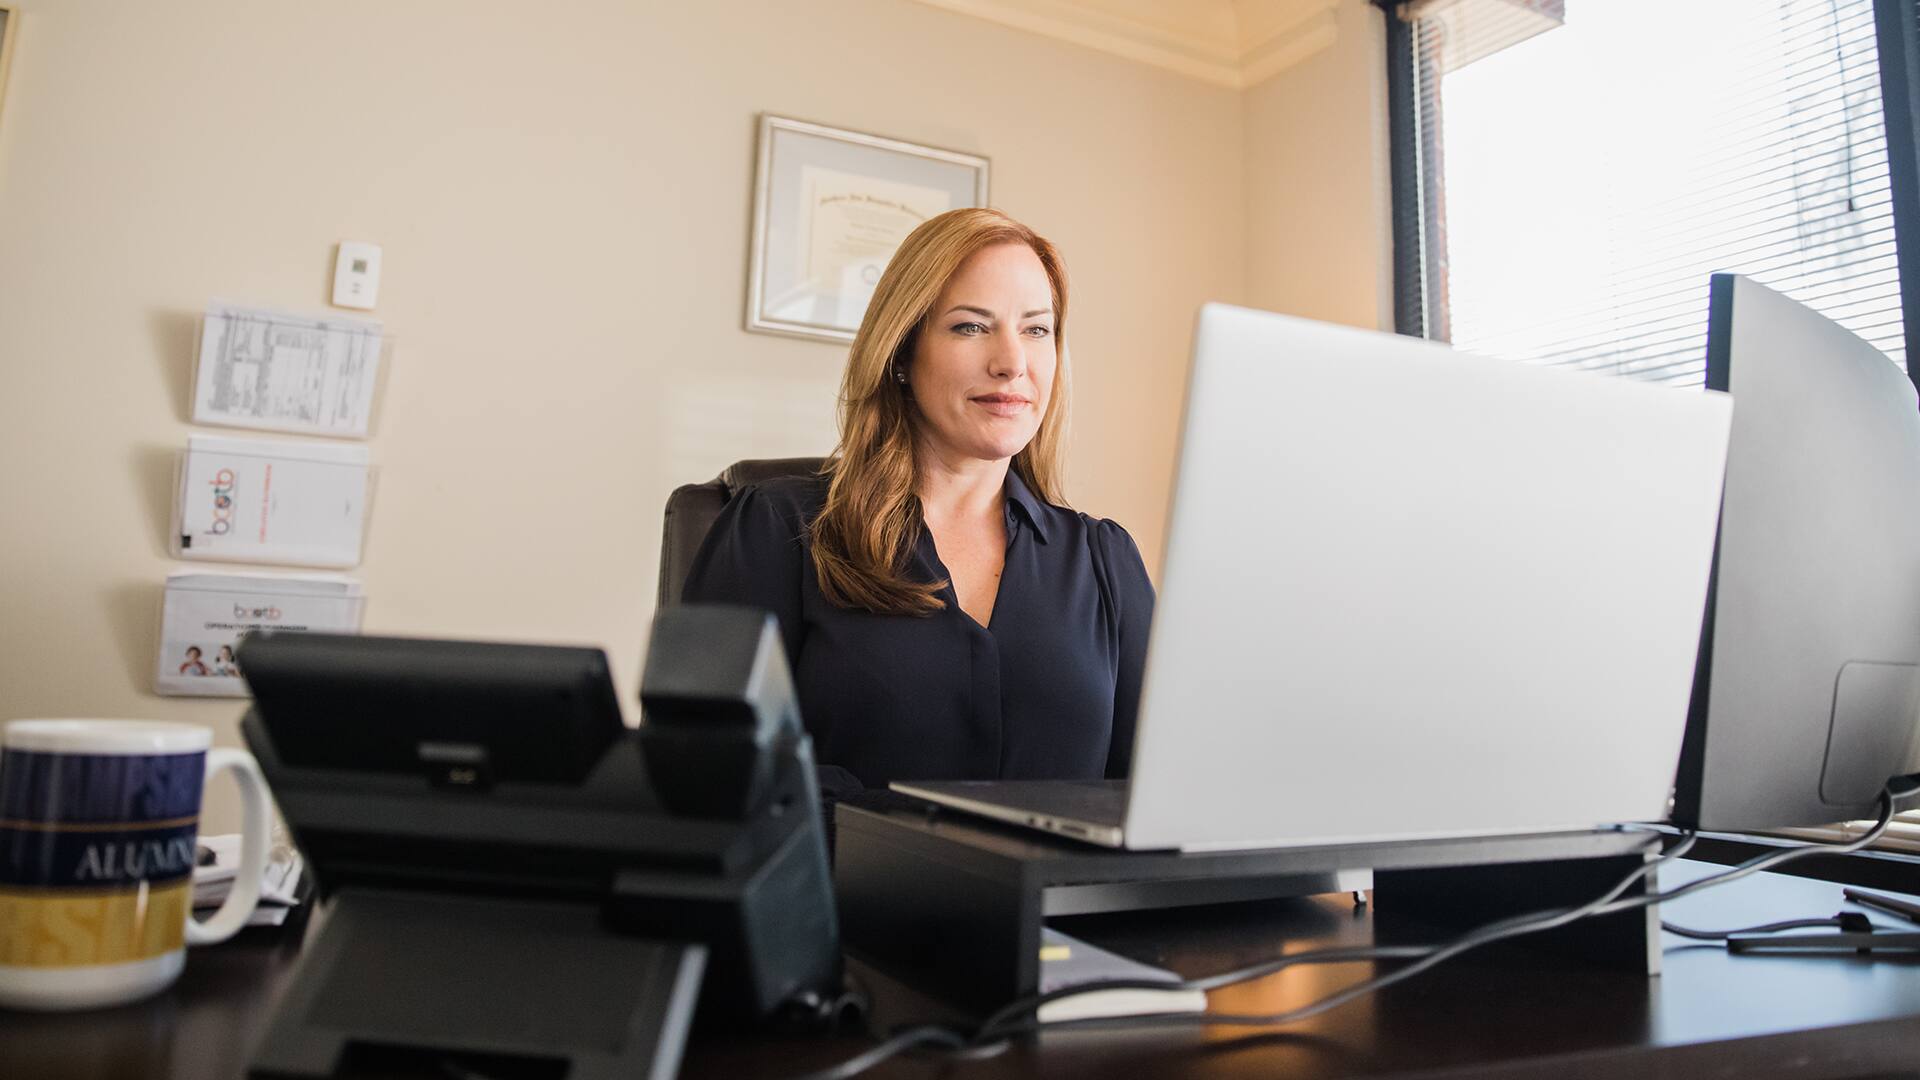 Nikki Bennett, who earned her MBA from SNHU, sitting at a desk in her office looking at her laptop with her framed diploma on the wall in the background.